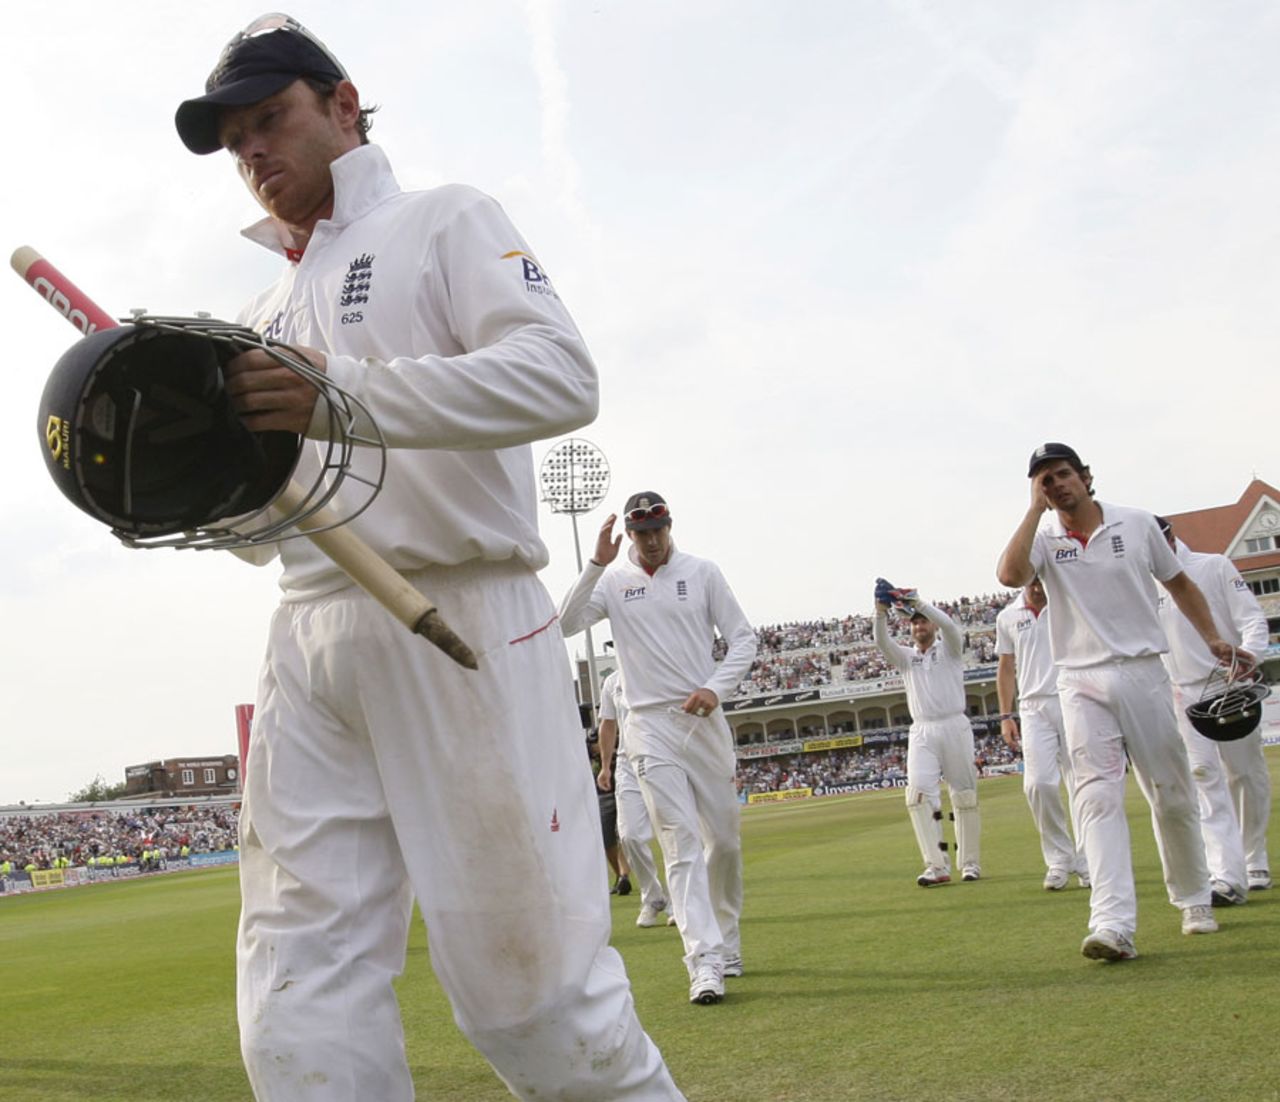 Ian Bell keeps a stump as a souvenir of England's win, England v India, 2nd Test, Trent Bridge, 4th day, August 1, 2011